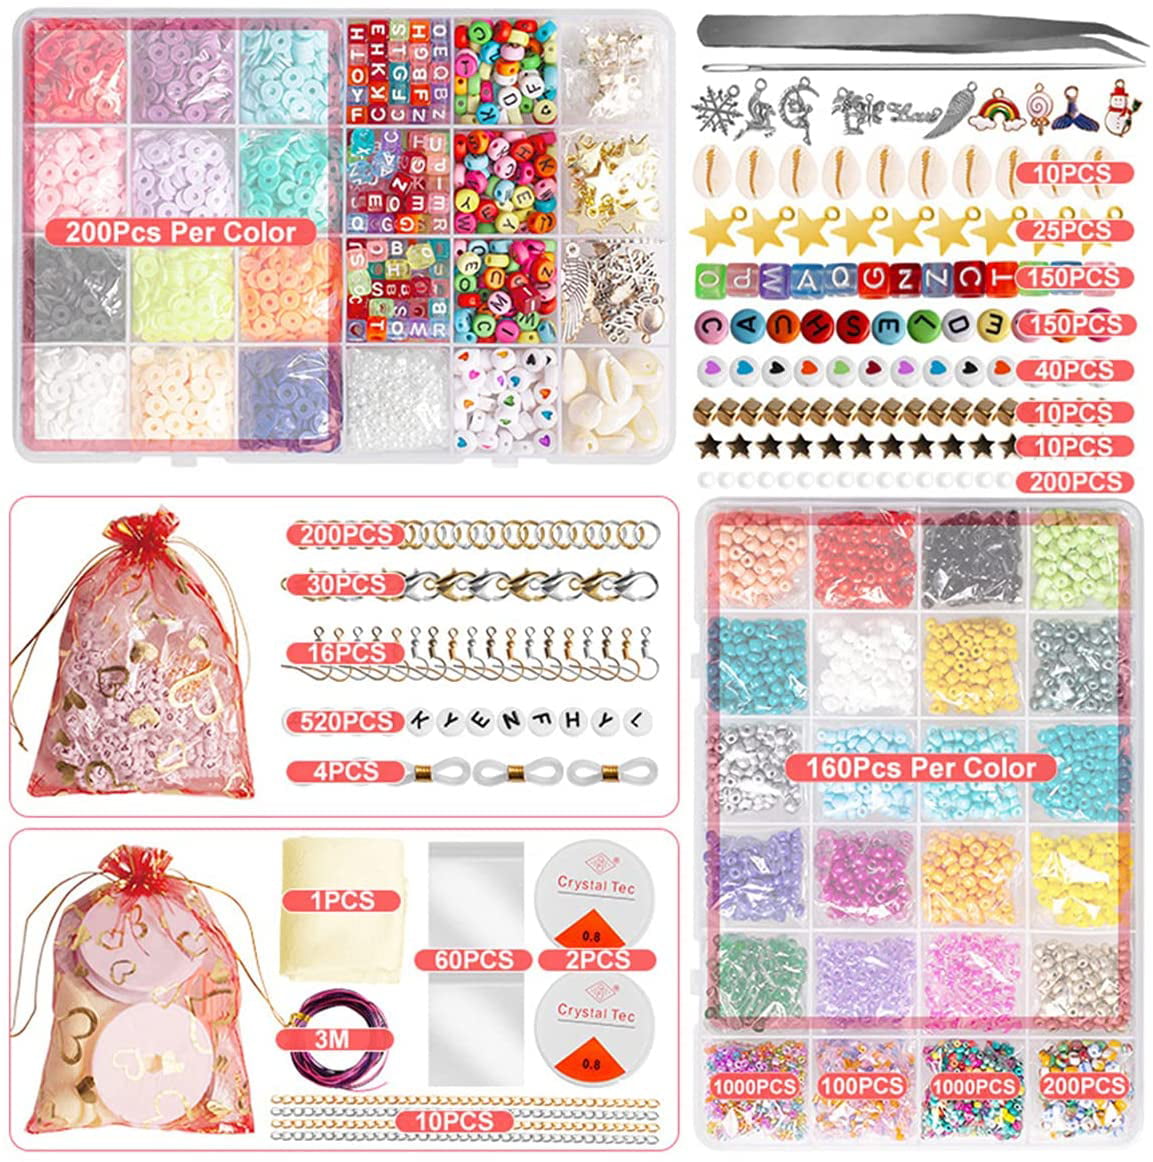 TOOPNK 360pcs Clay Bead Kits with pliers,pearls and Crystal Wires, 24 Kinds of Polymer Clay Beads for Making Jewelry DIY Bracelet Ne